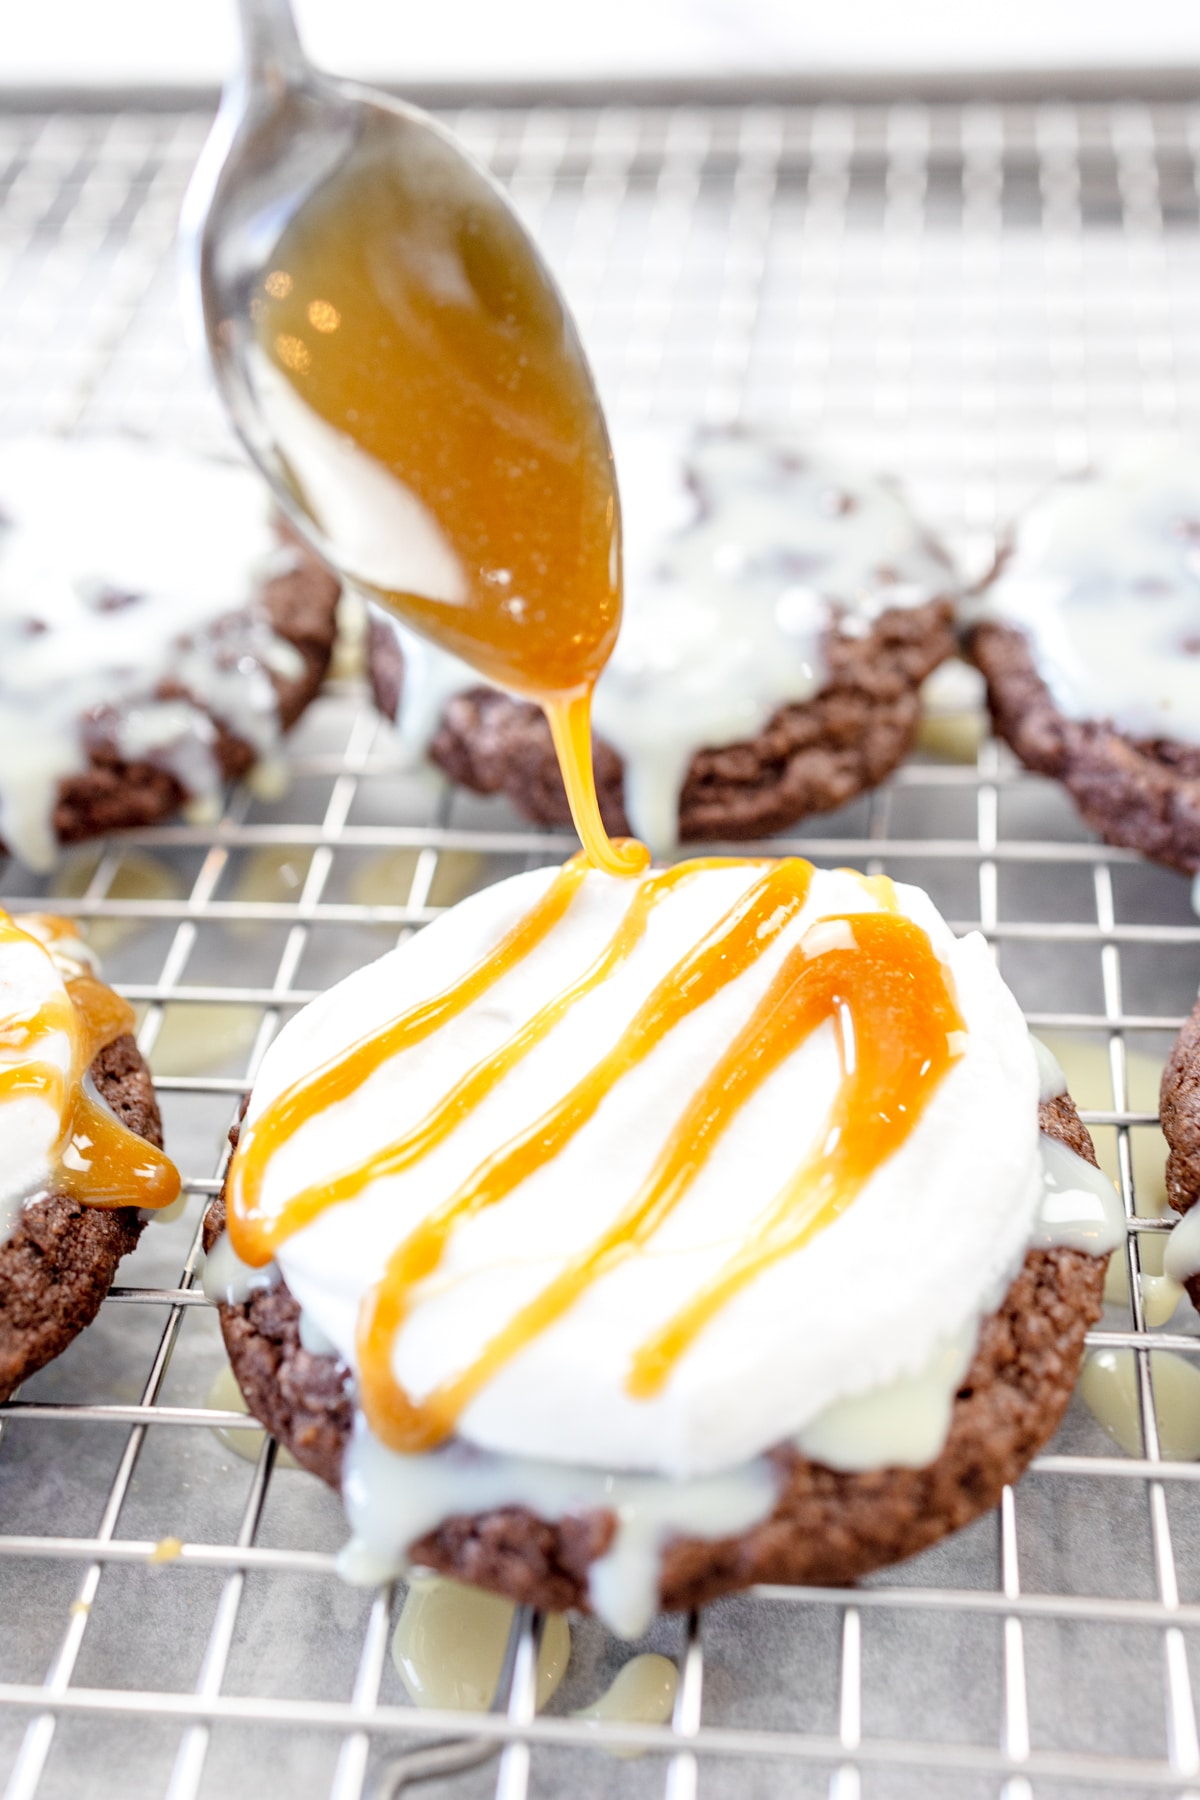 Close up of a spoon drizzling caramel sauce onto icing onto a chocolate cookie on a wire rack.